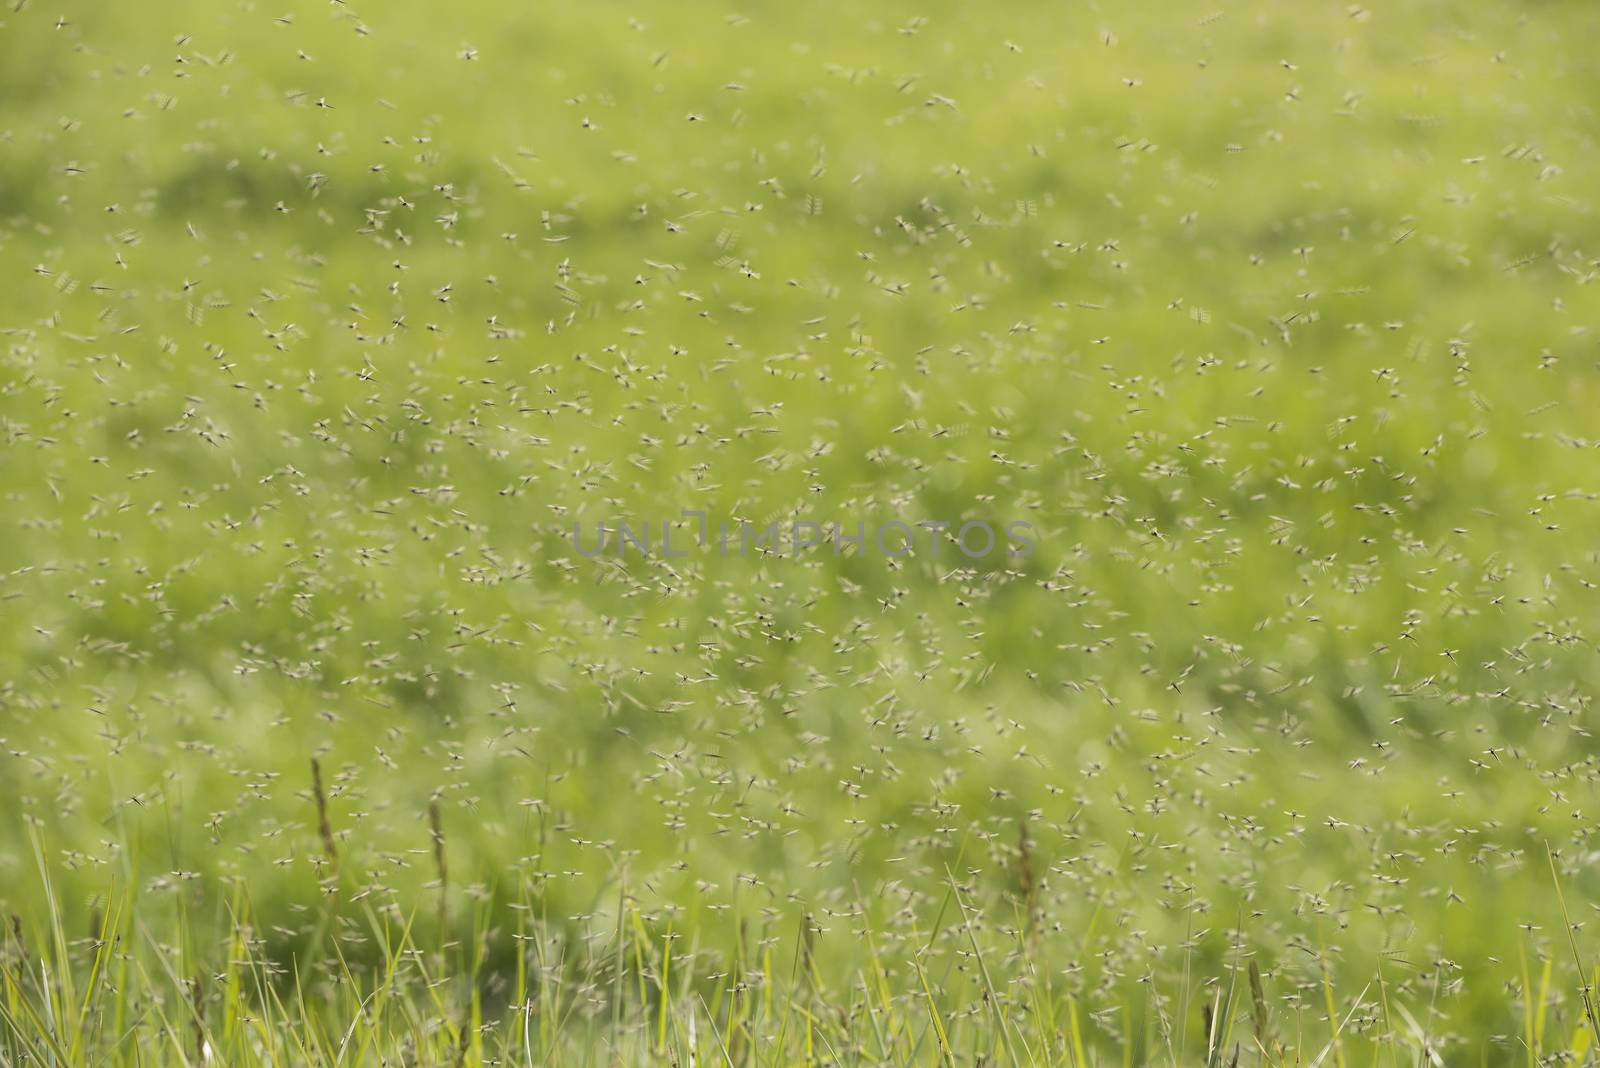 Swarms of mosquitoes over a grass field in the Netherlands
